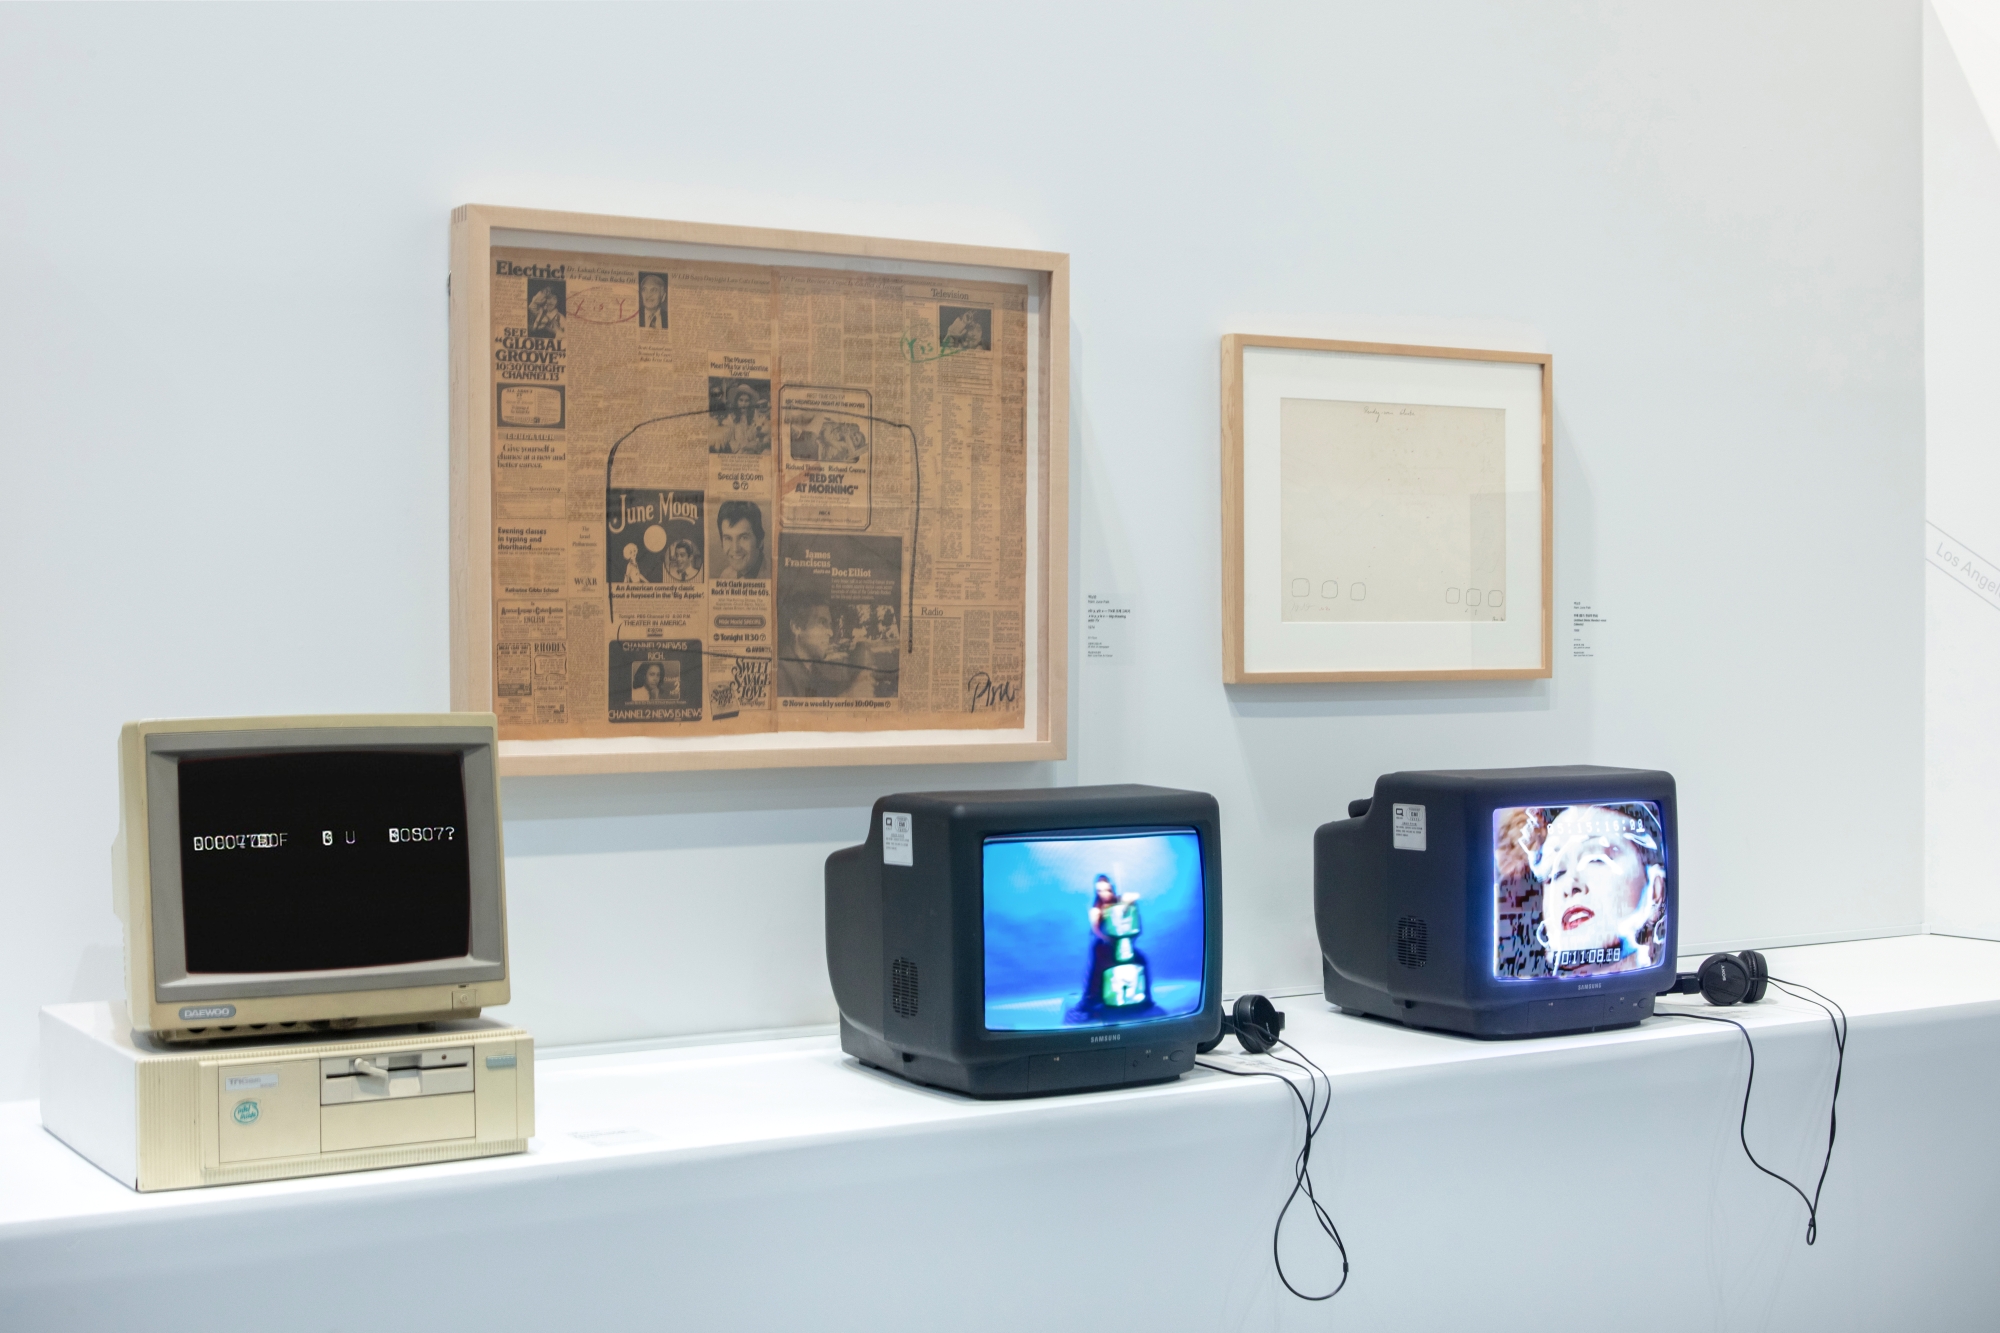 White shelf in a museum gallery holding a 1980s-vintage computer and two tube TV monitors with headphones attached. Two framed artworks are on the wall behind them.